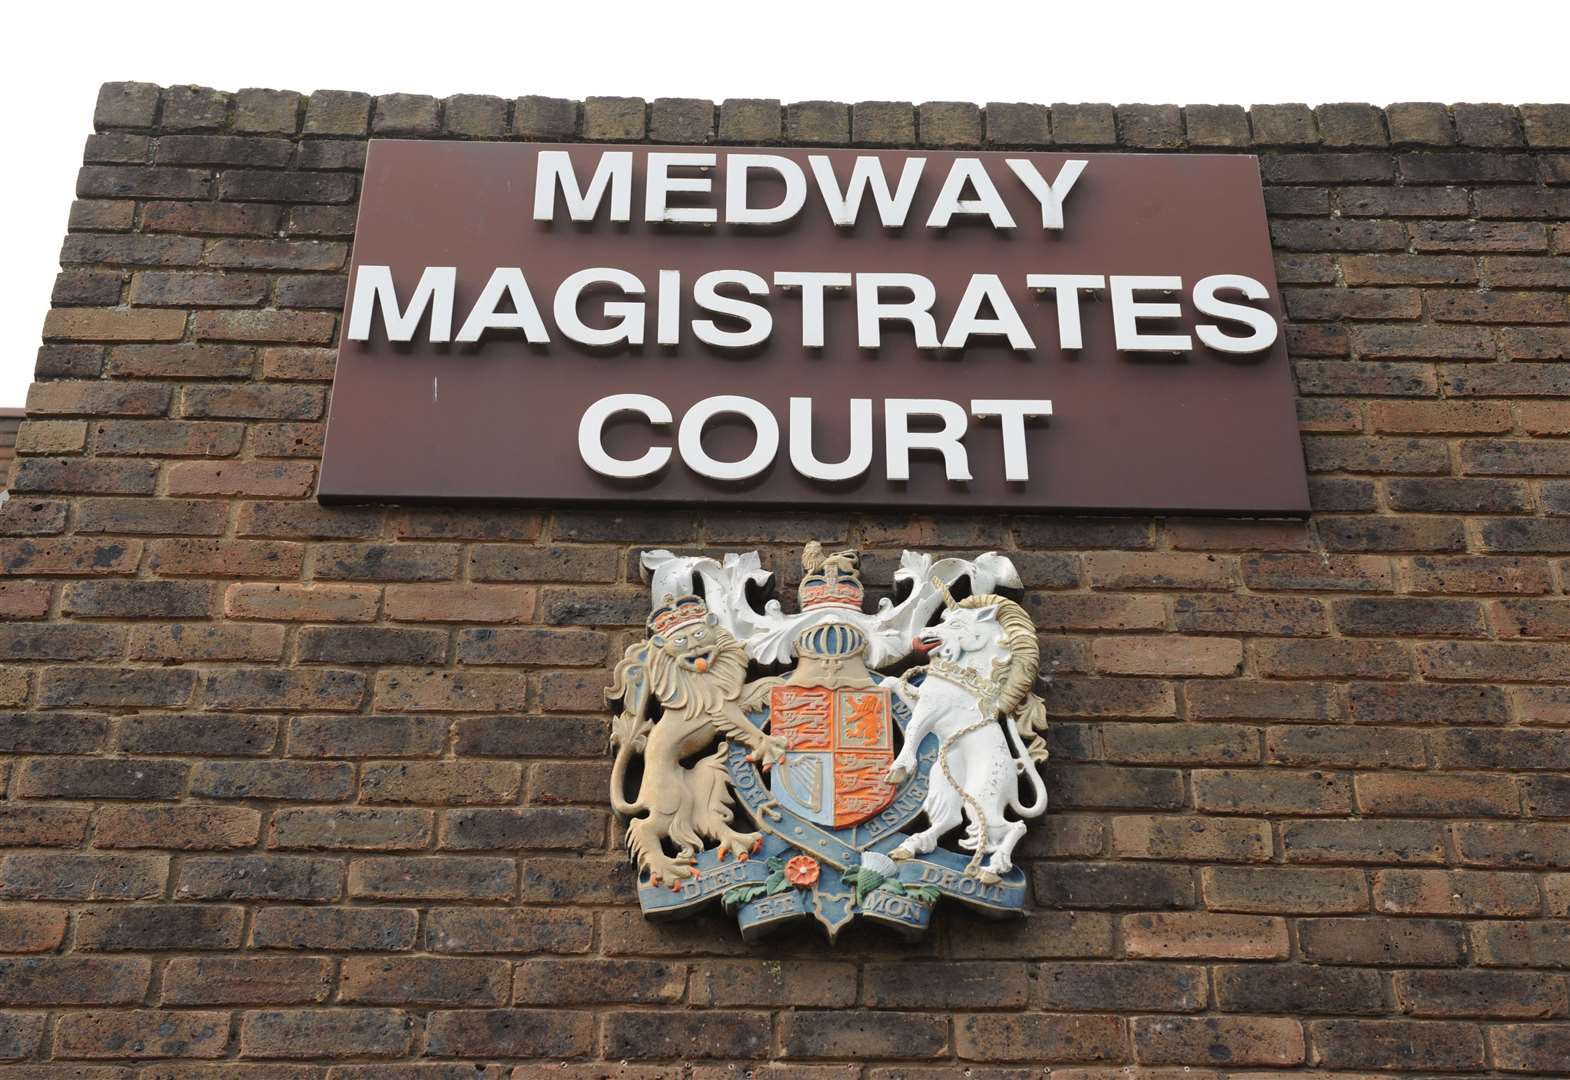 Yeldling appeared at Medway Magistrates' Court